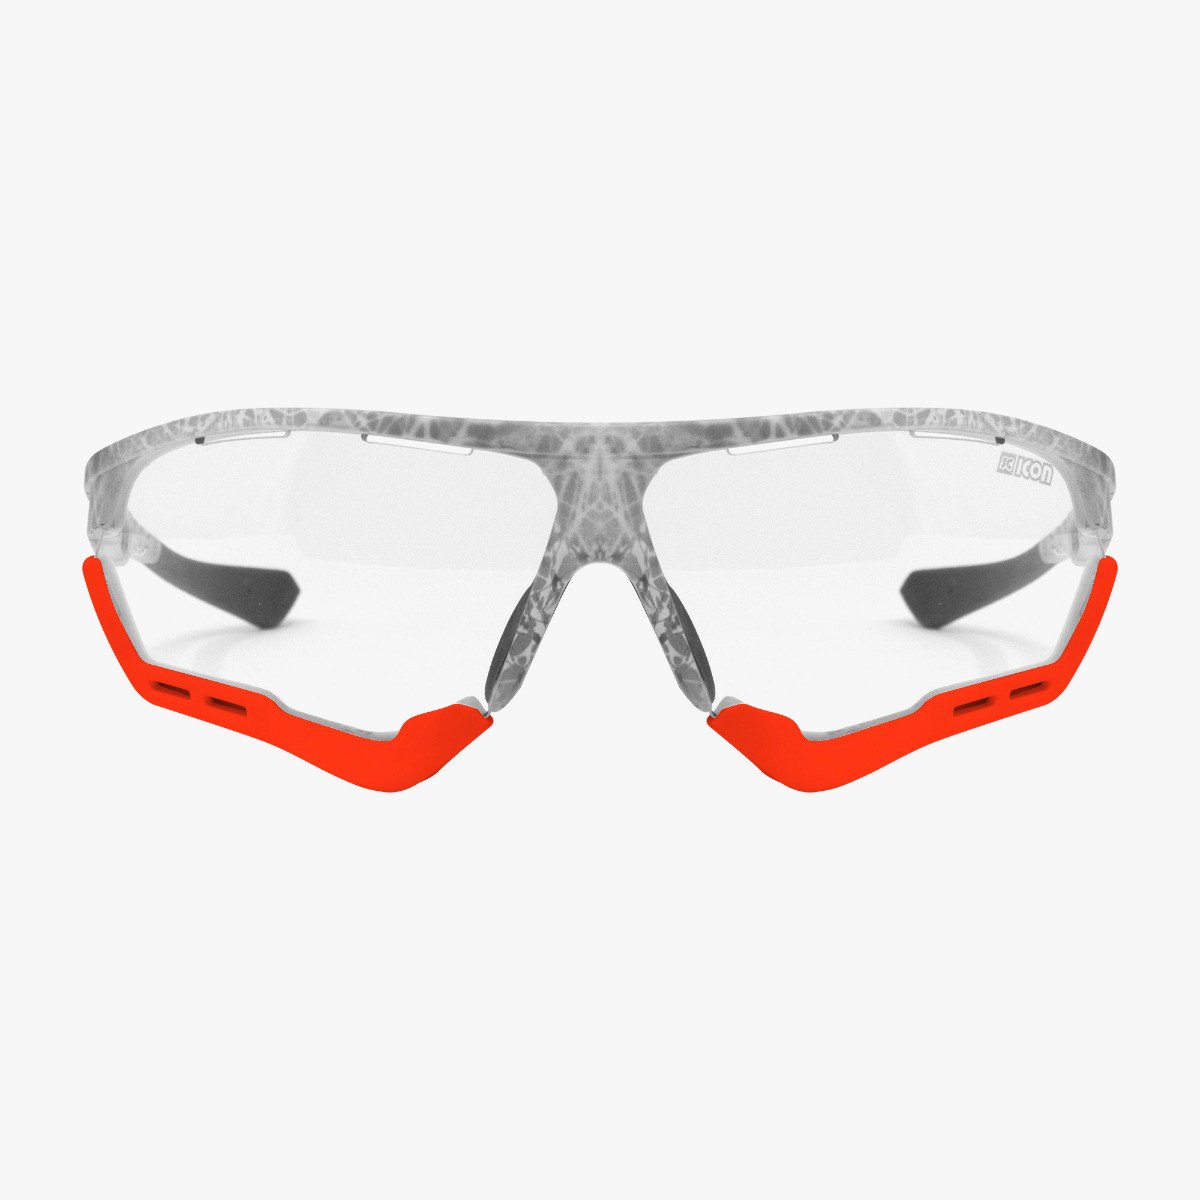 Scicon Sports | Aerocomfort Sport Cycling Performance Sunglasses - Frozen White / Photocromatic Red - EY15160503